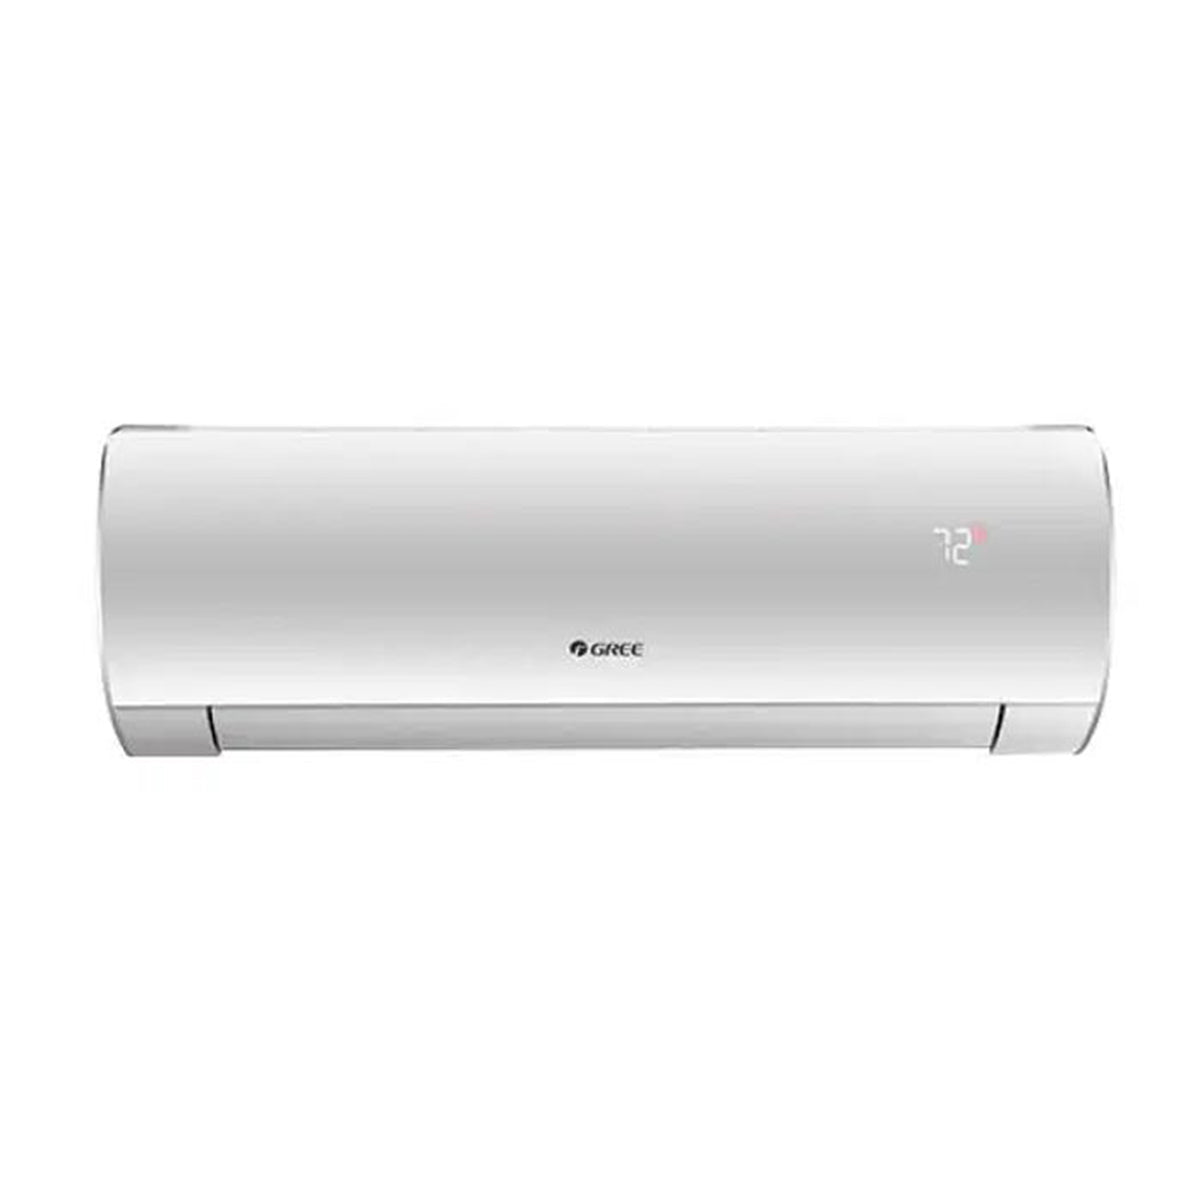 Gree Air Conditioner 2 Ton Inverter - GS-24FITH6C/6S/6G 65% Savings